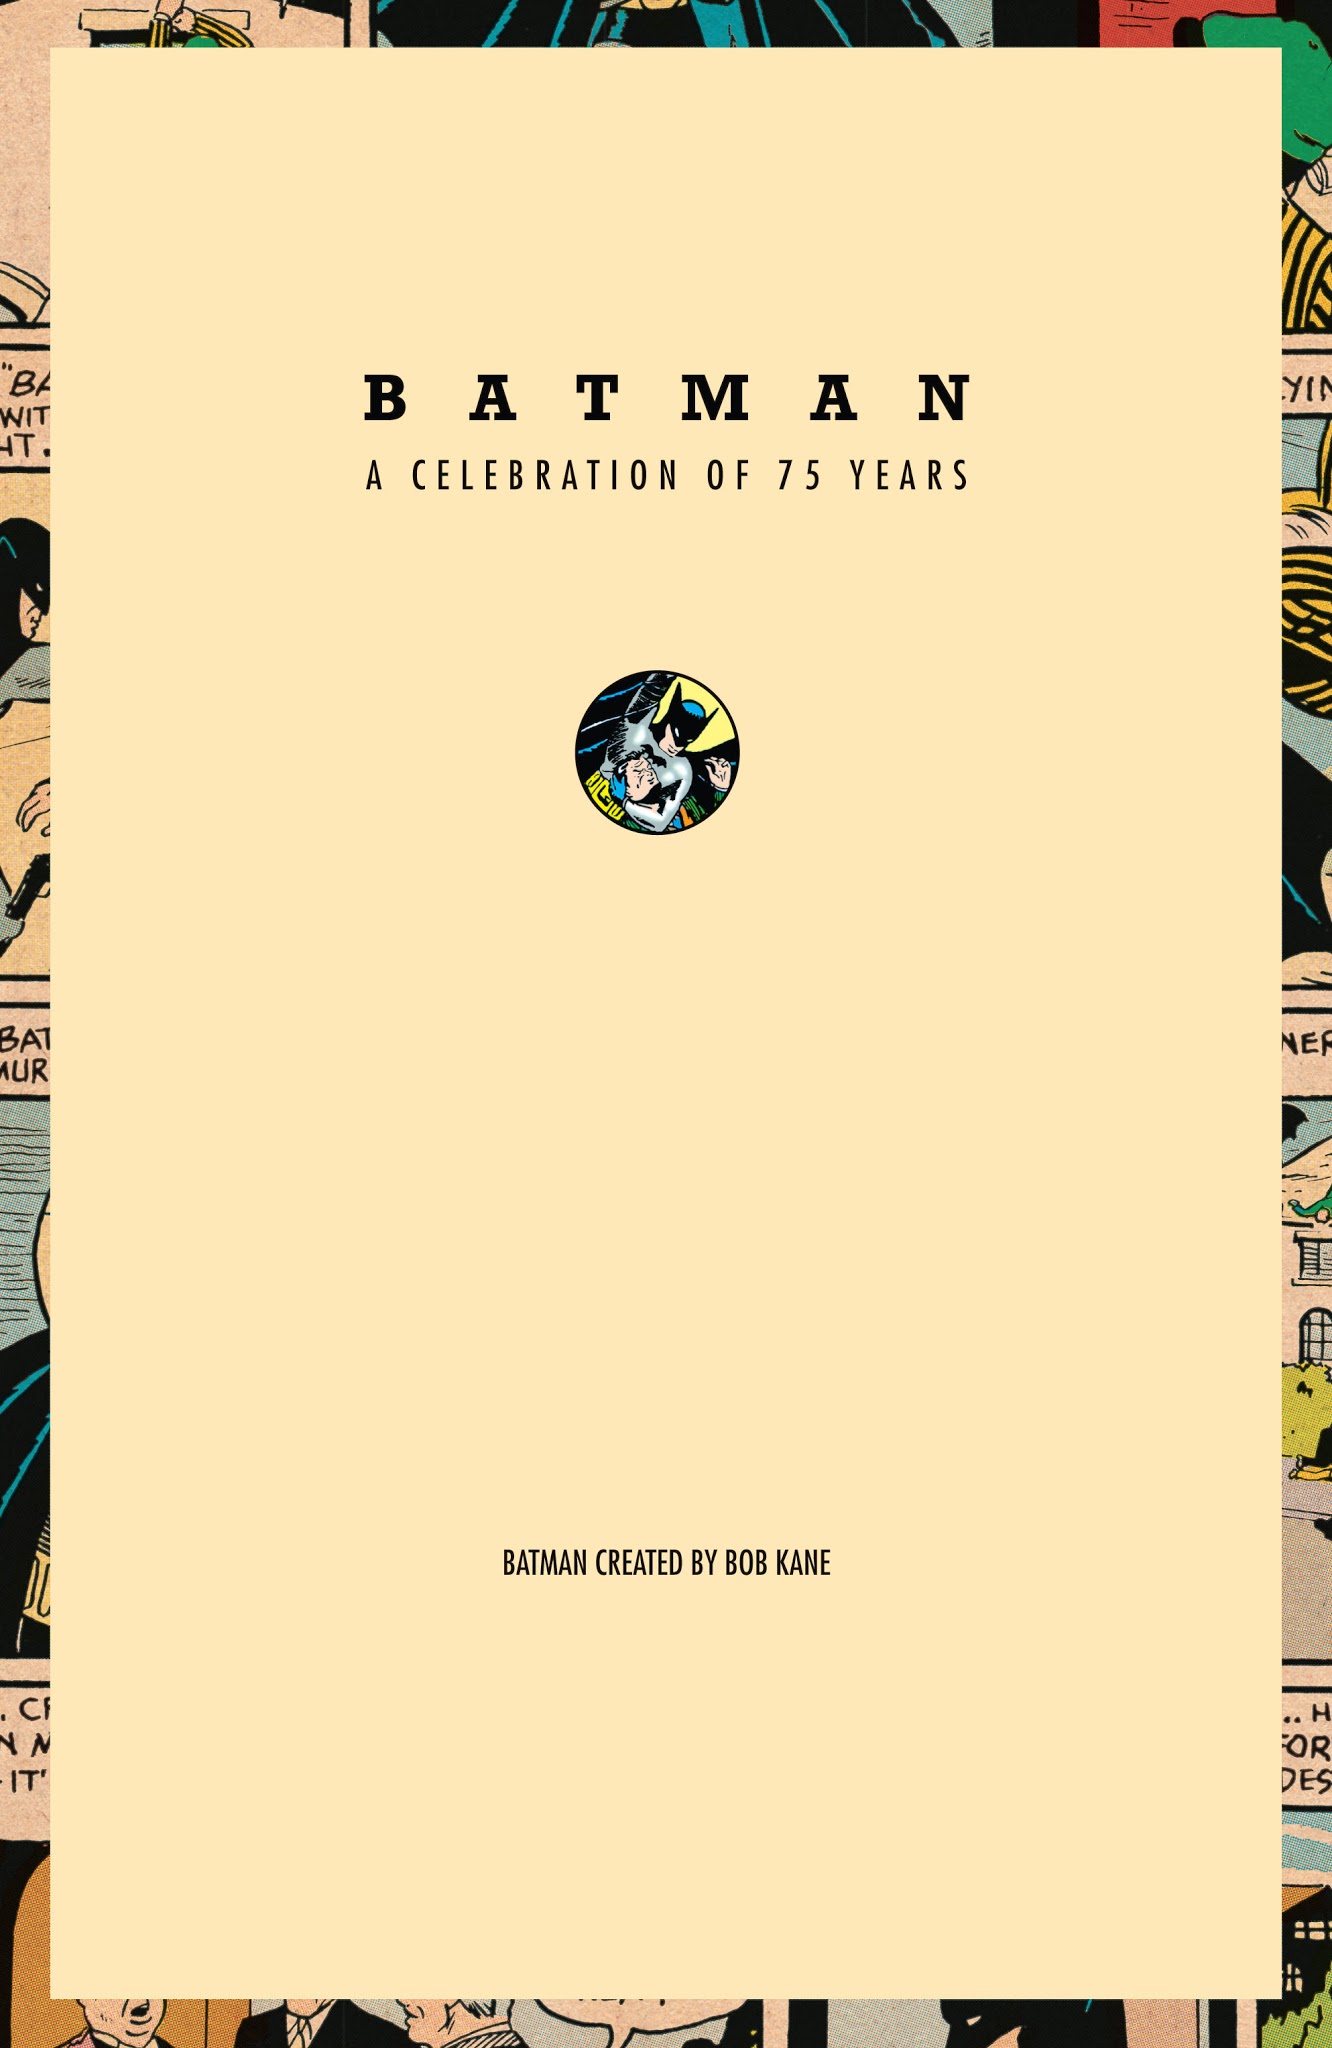 Read online Batman: A Celebration of 75 Years comic -  Issue # TPB - 3